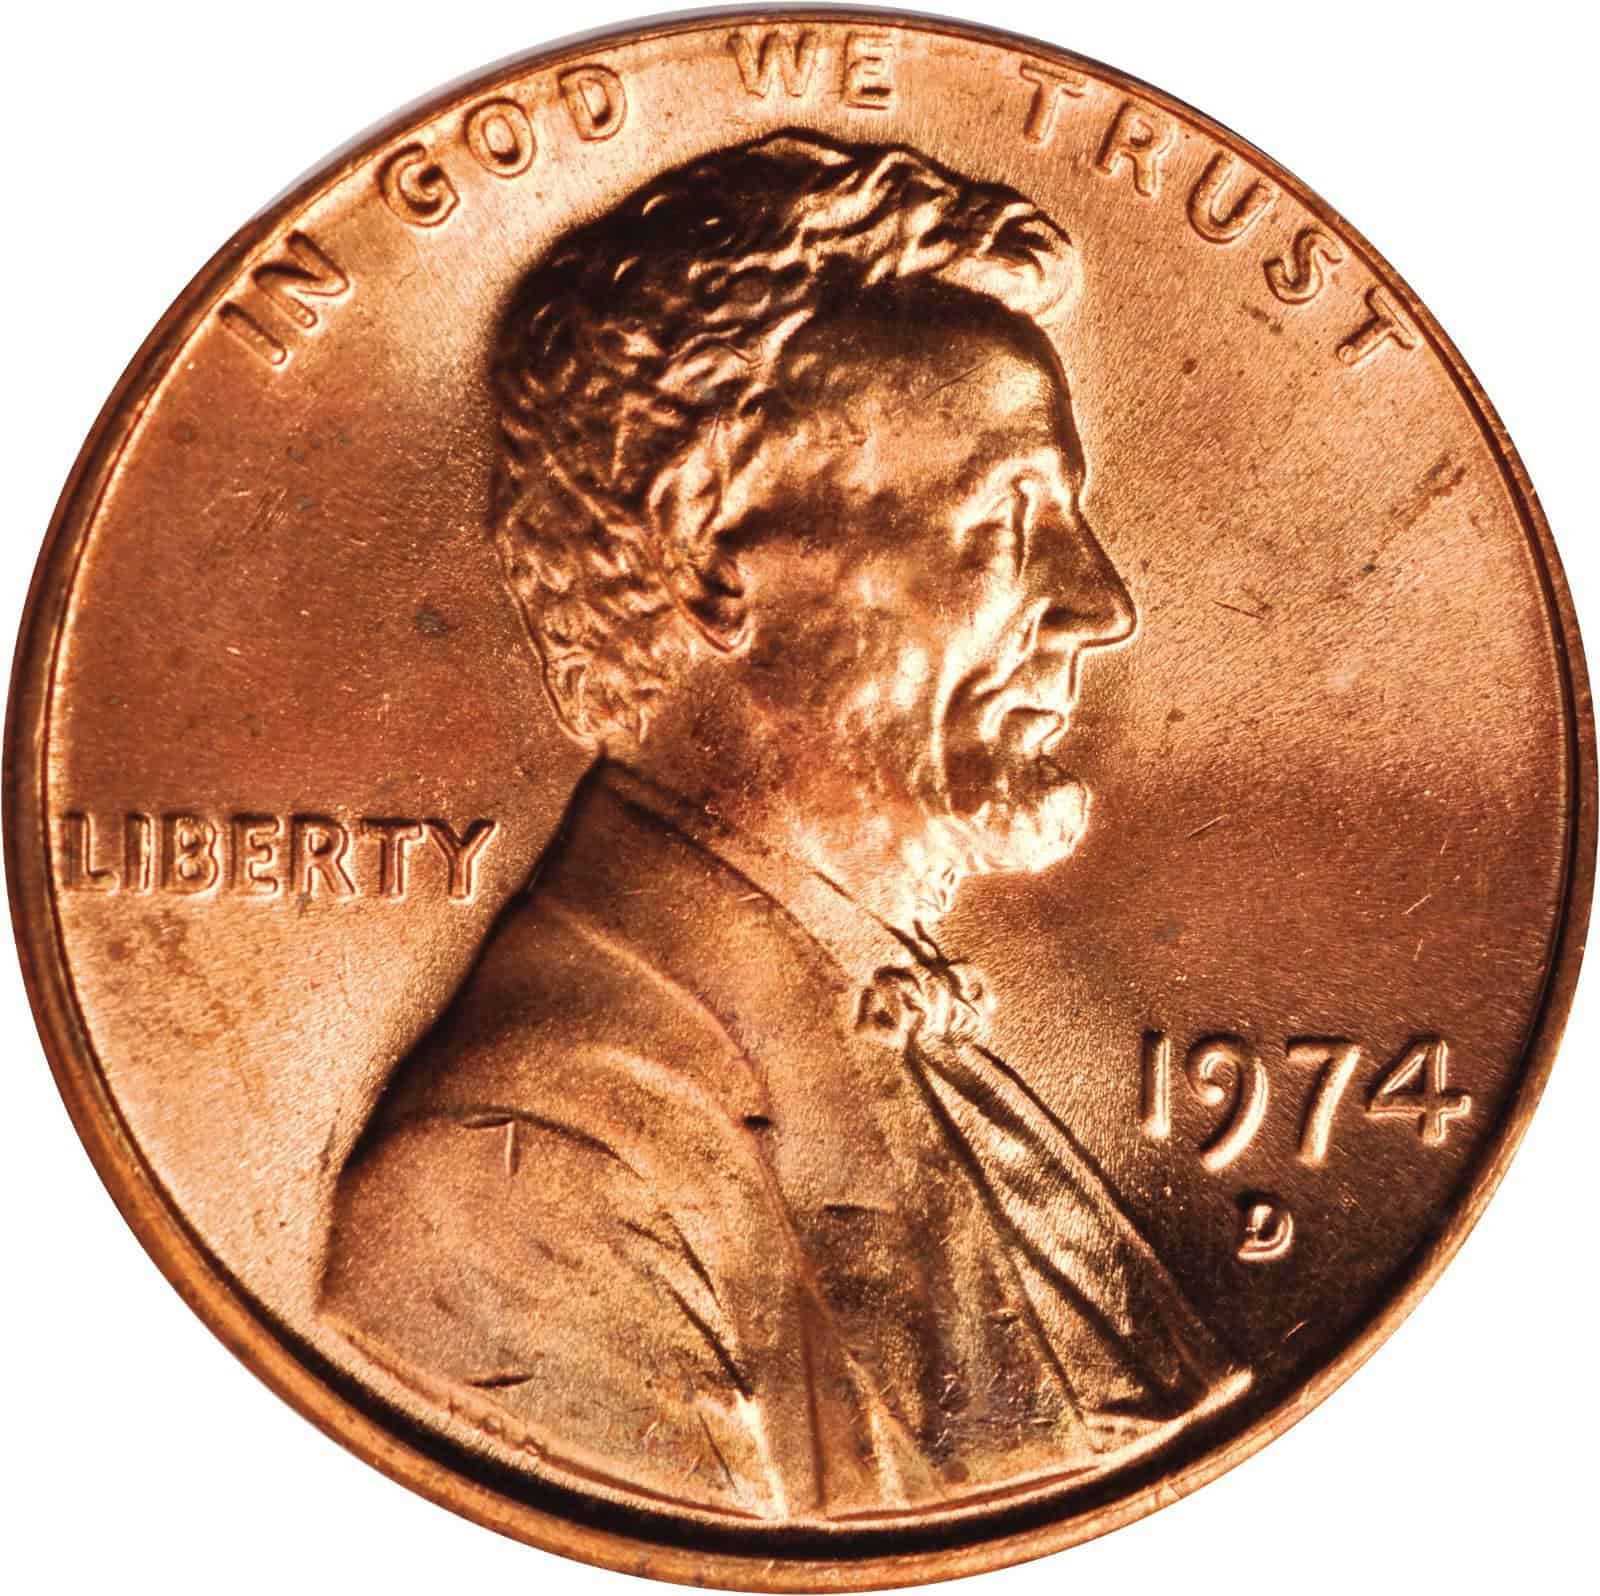 The Obverse of the 1974 Penny